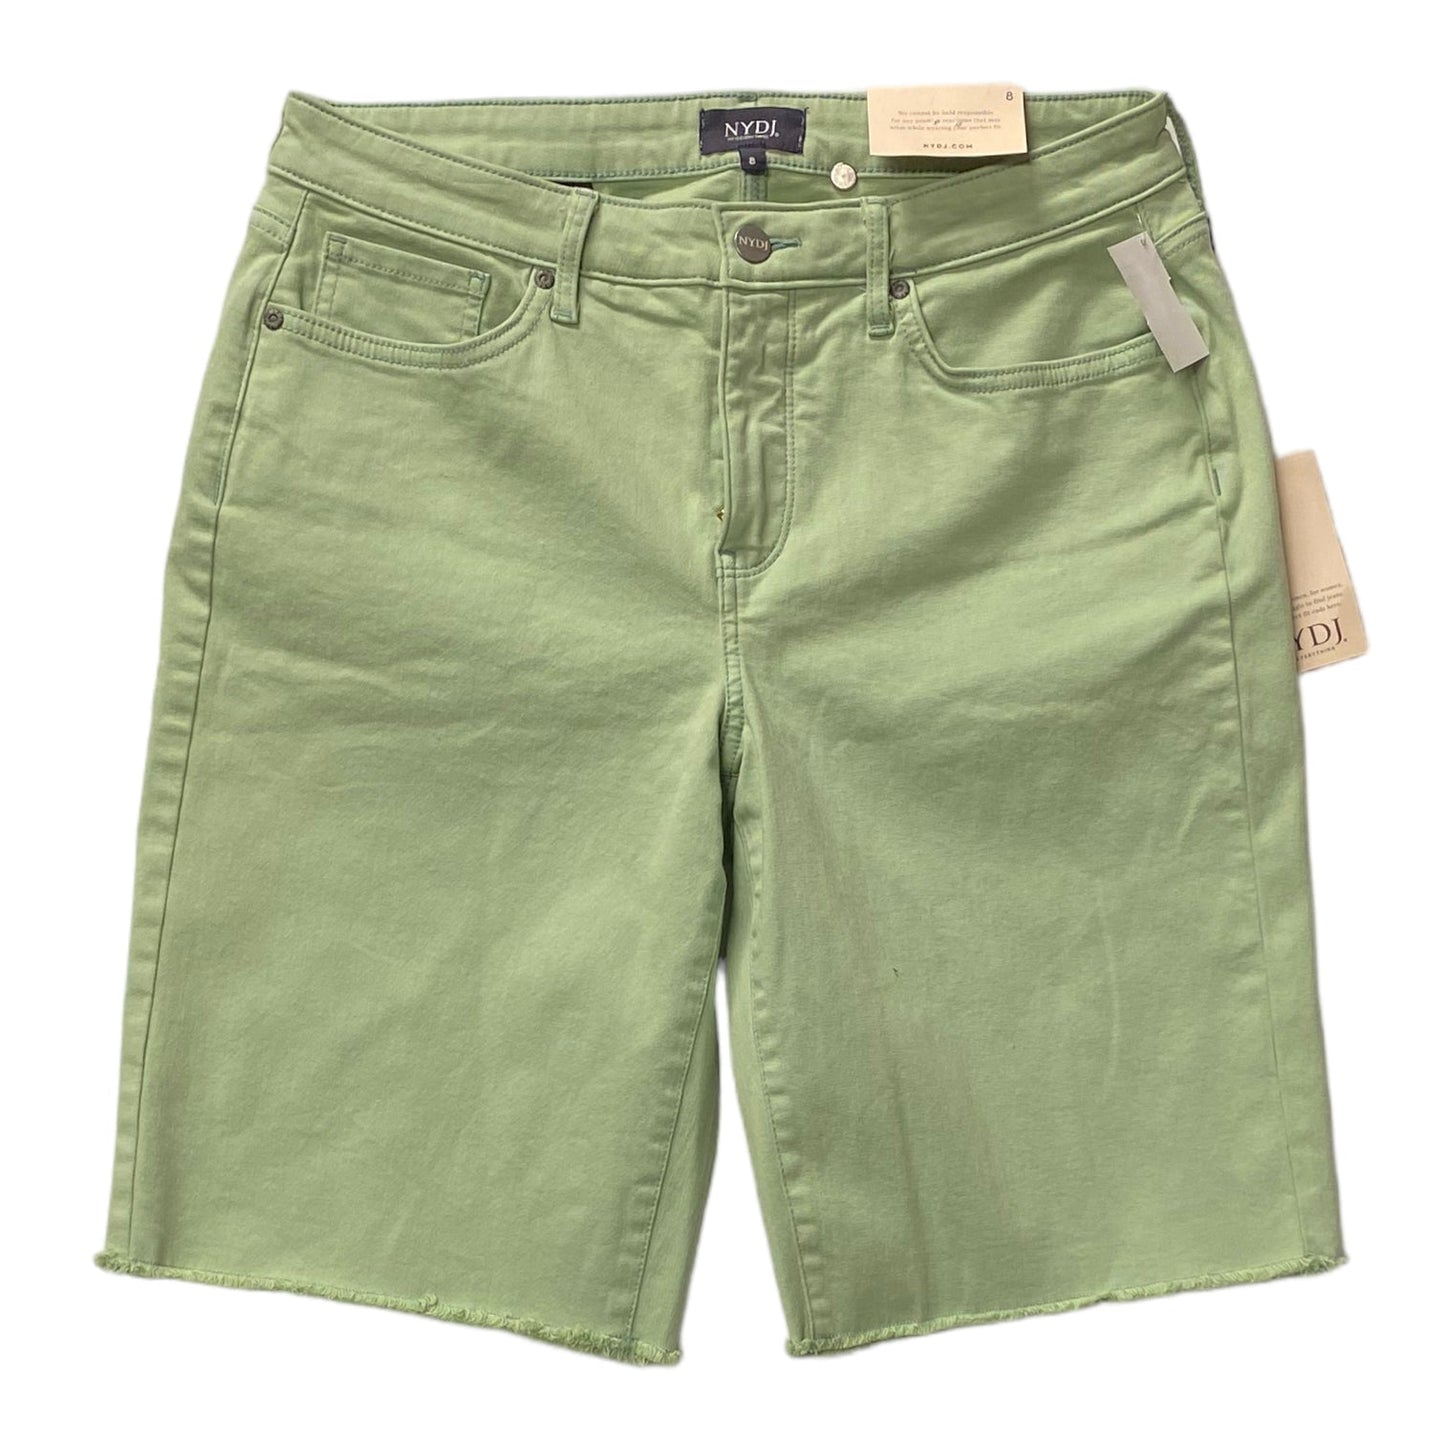 Green Shorts Not Your Daughters Jeans, Size 8